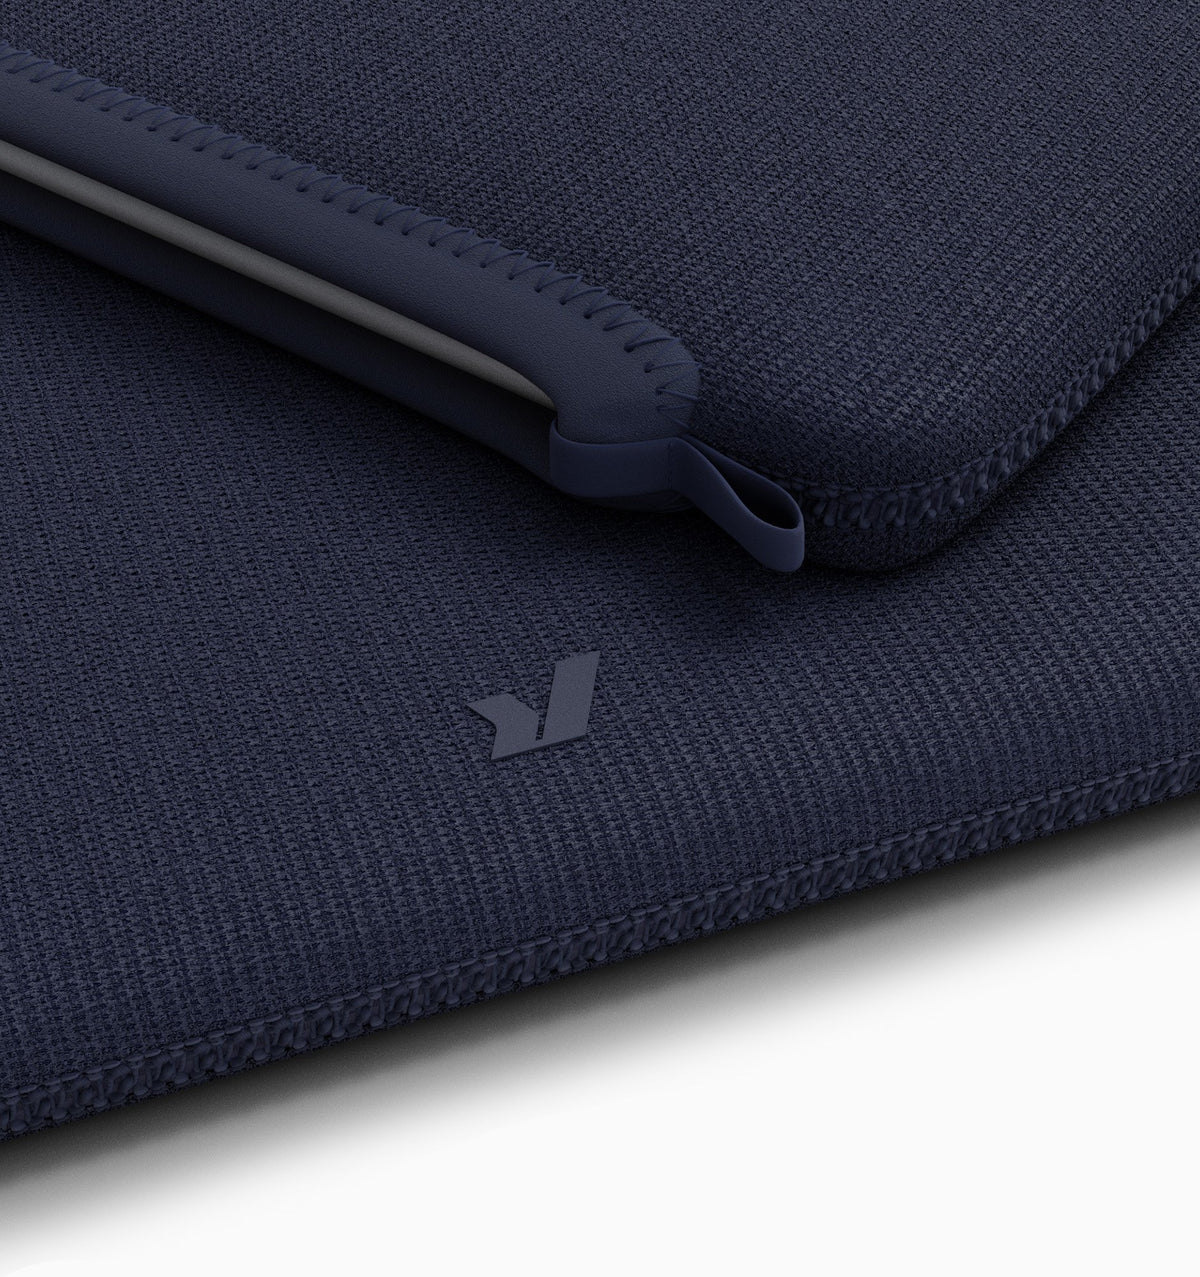 Rushfaster Laptop Sleeve For 13" MacBook Air/Pro Blue